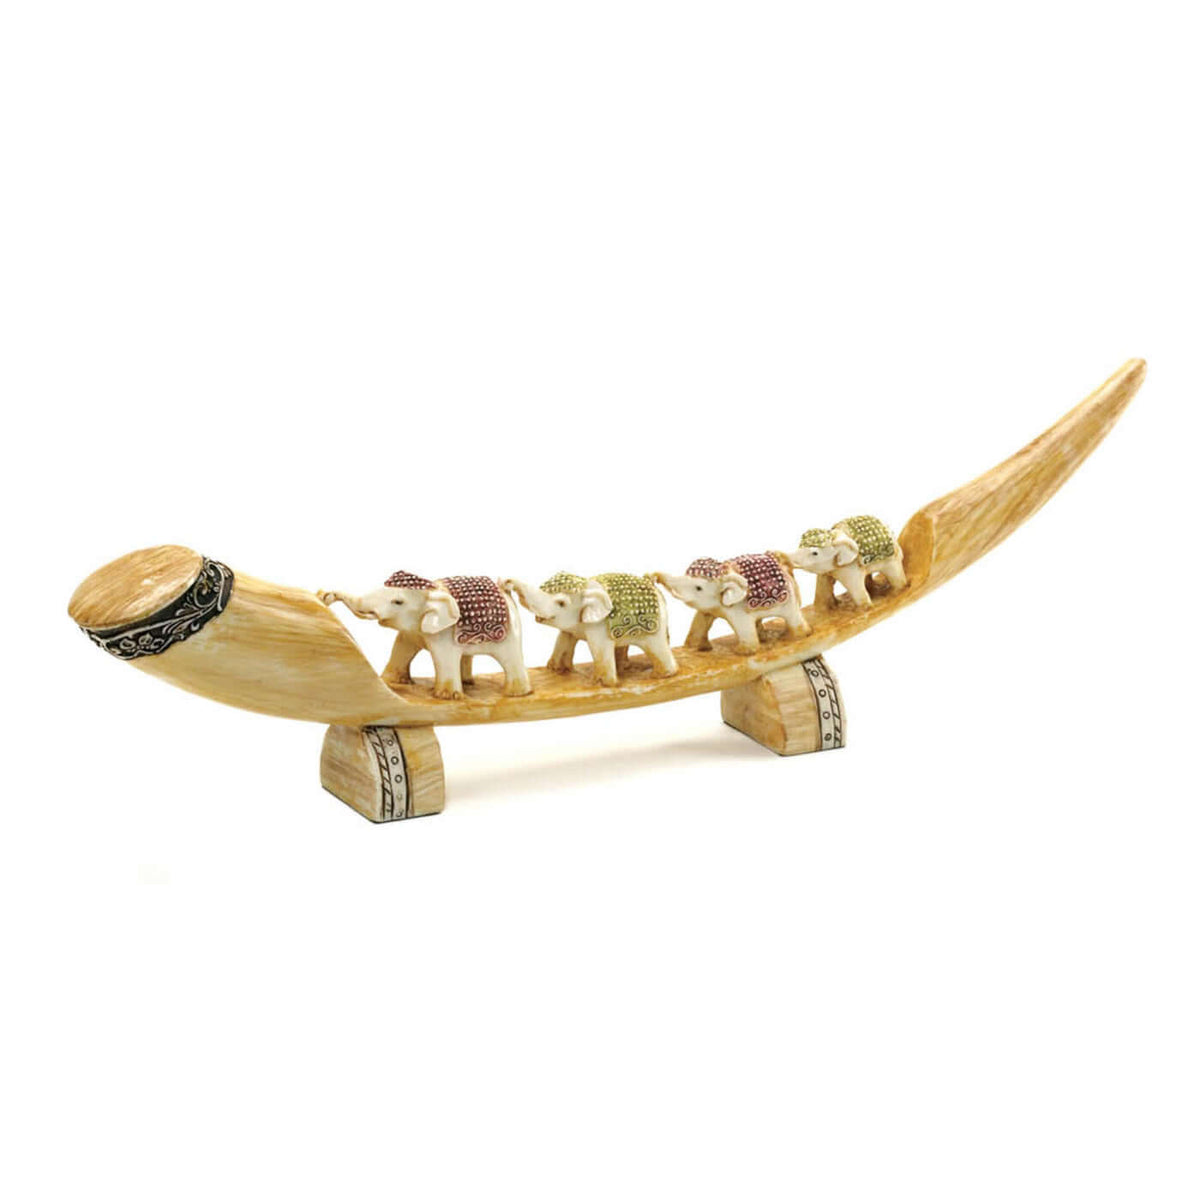 Multicolored Elephant Tusk for Gifts